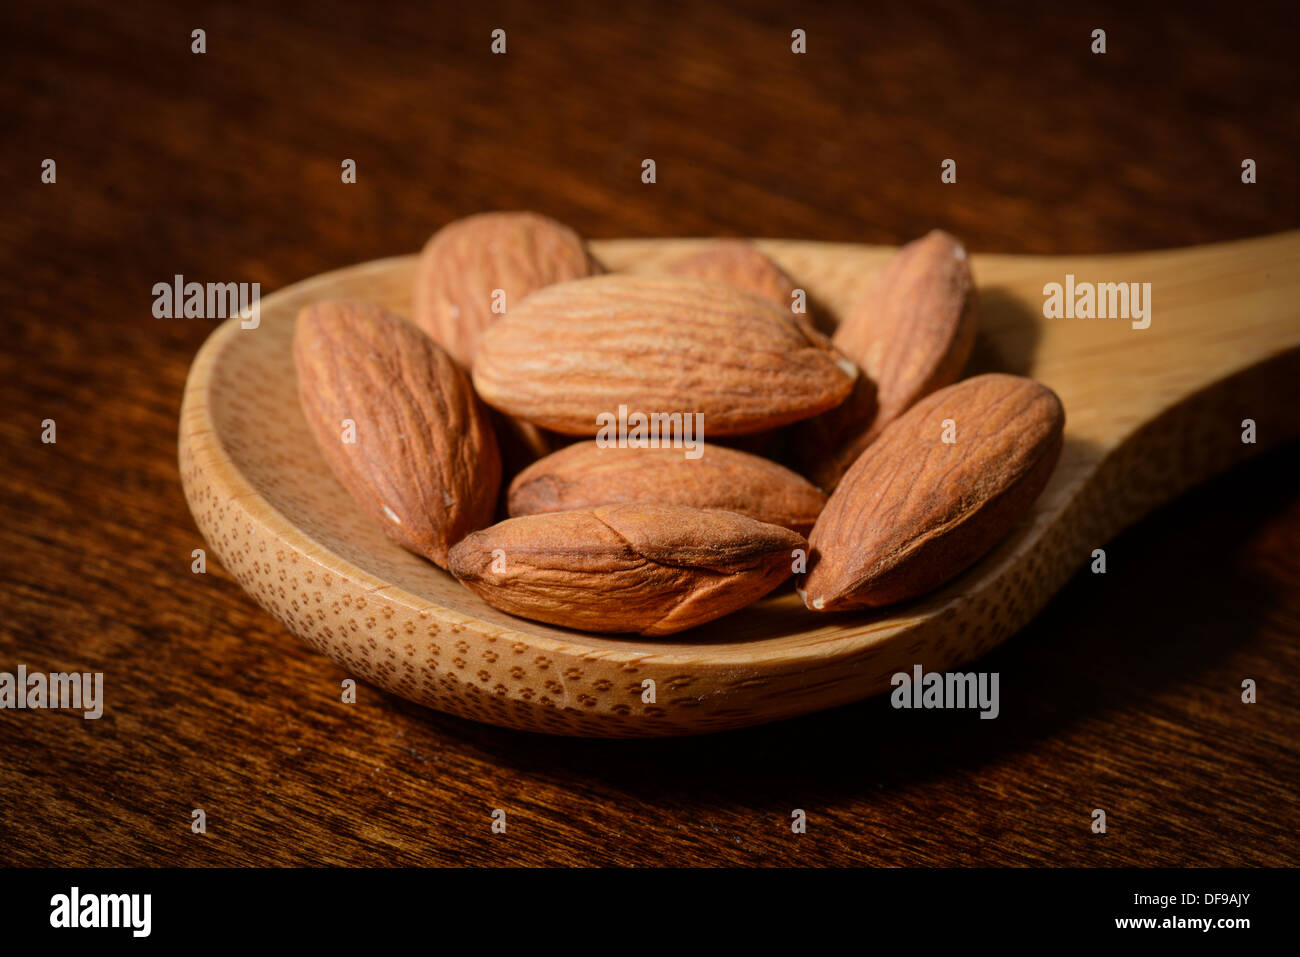 Almonds in a Spoon Close Up Stock Photo